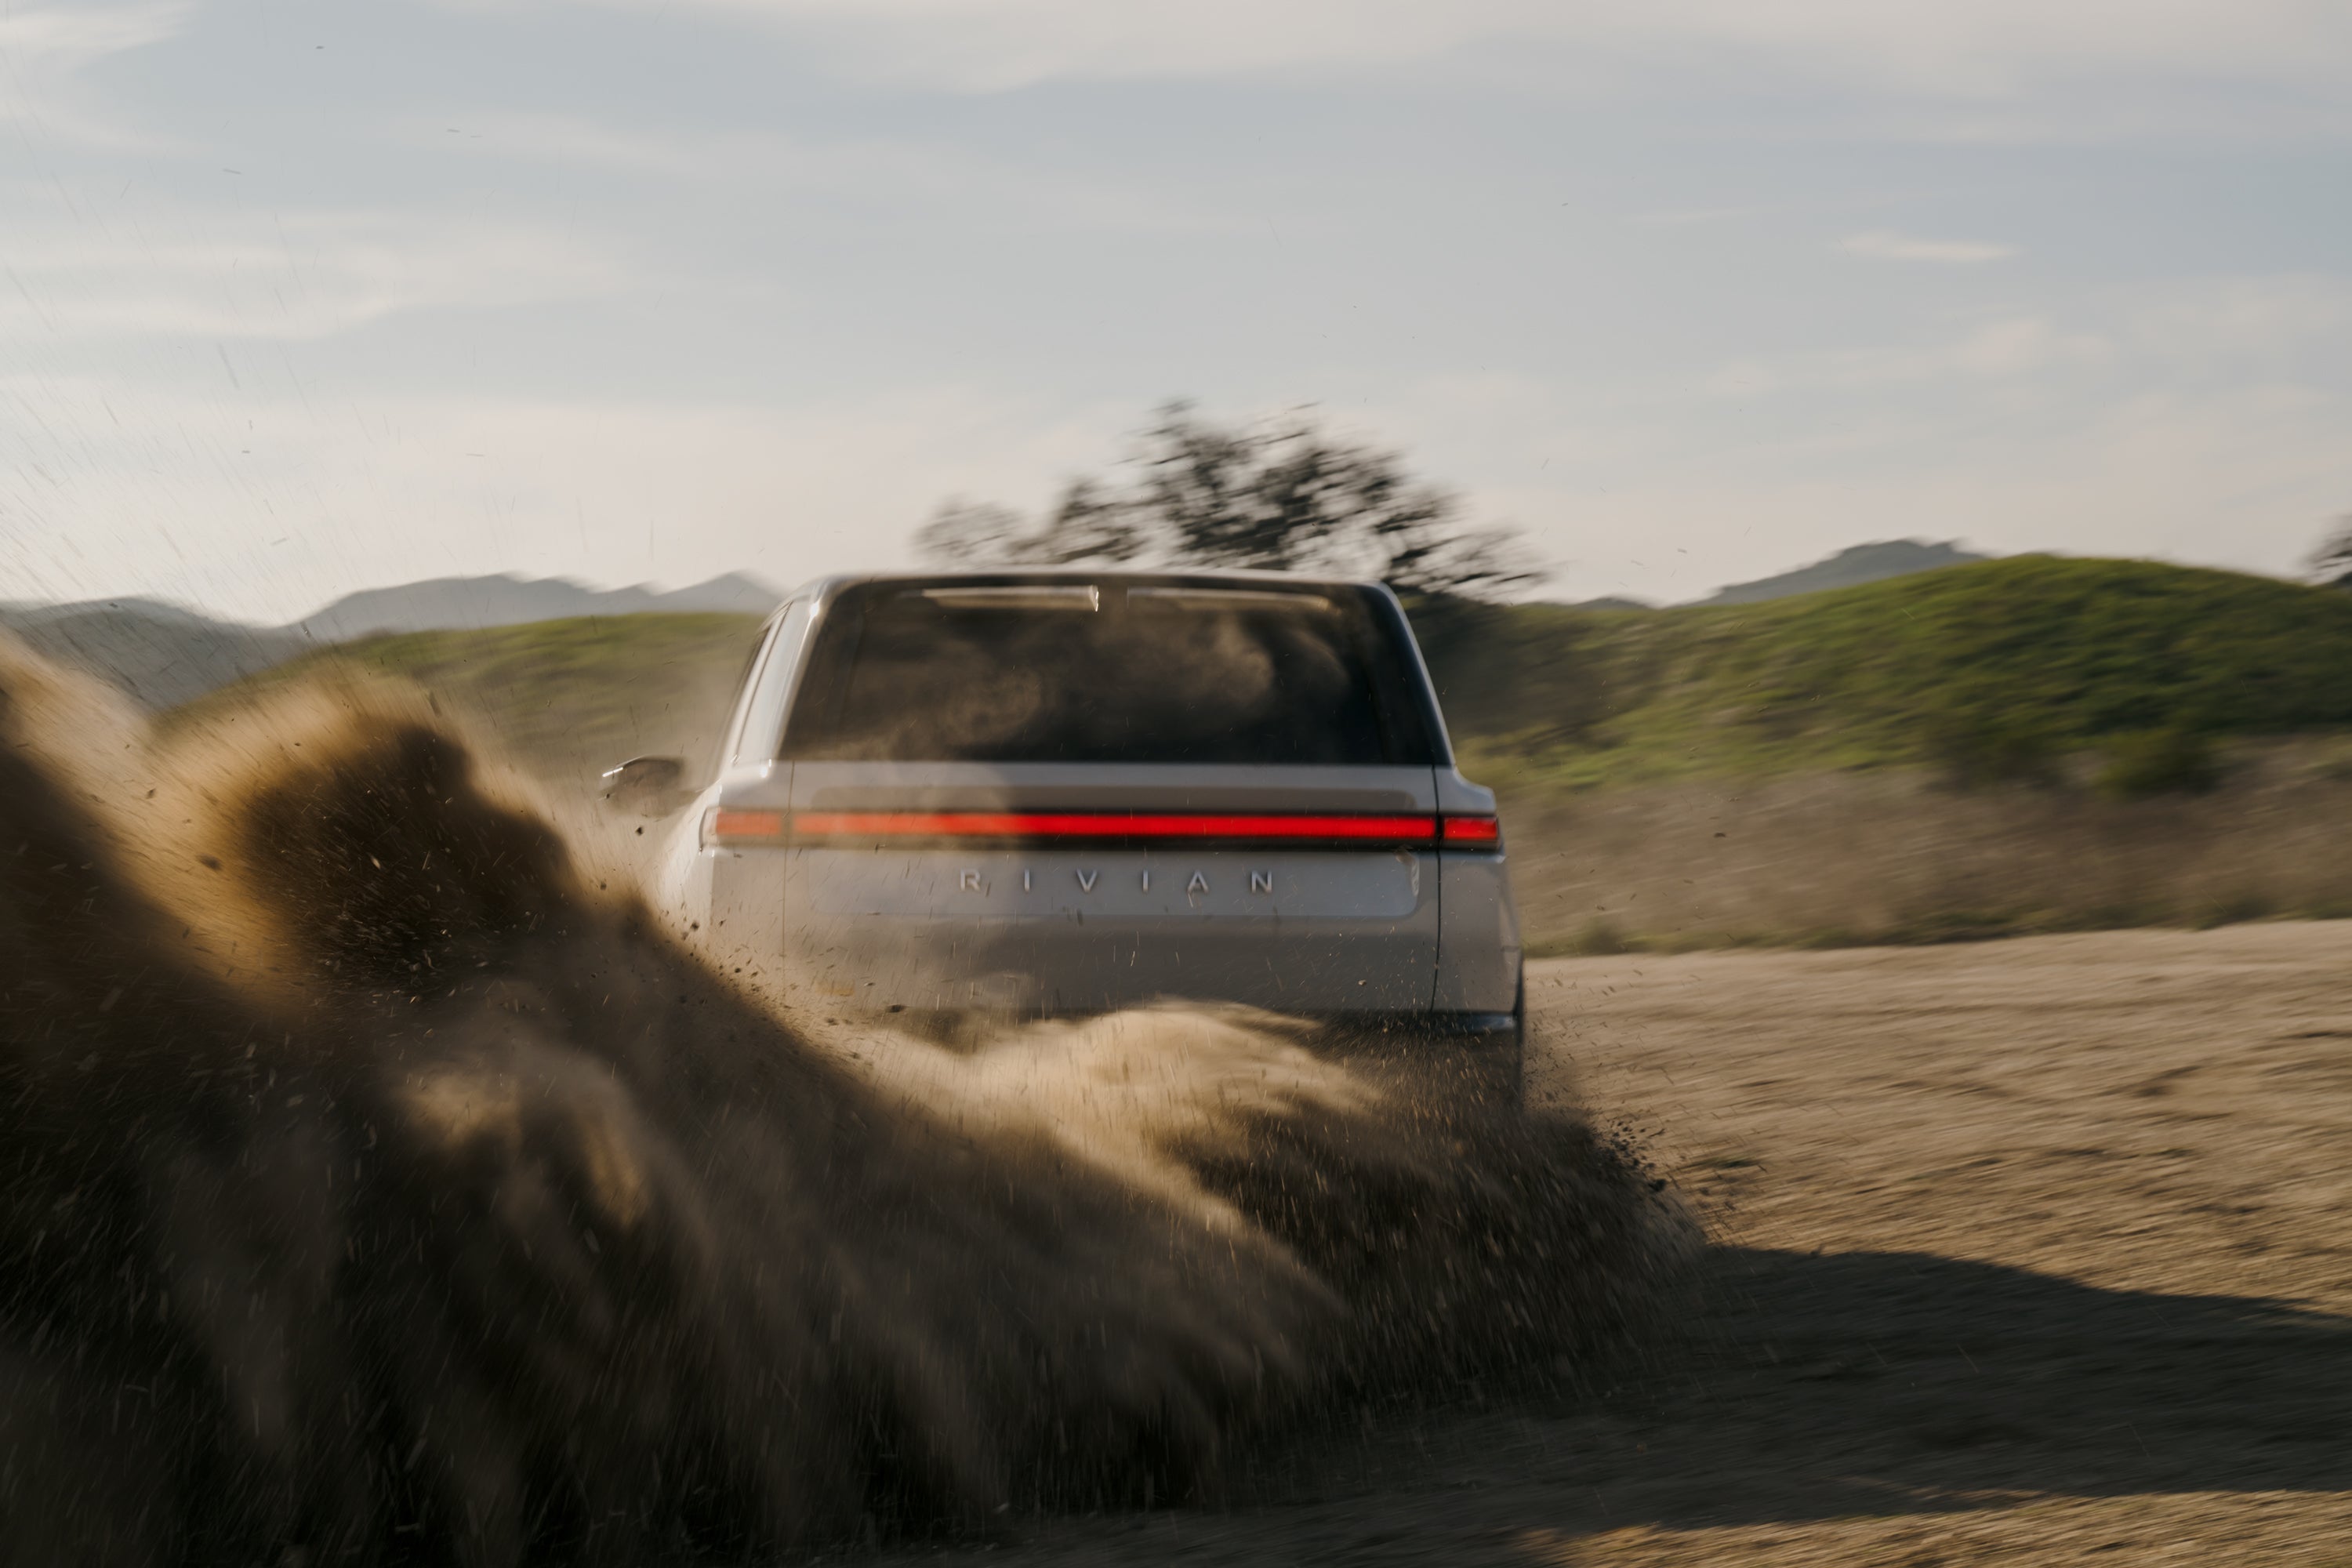 The new Rivian R2 is seen from the rear, sliding through dirt